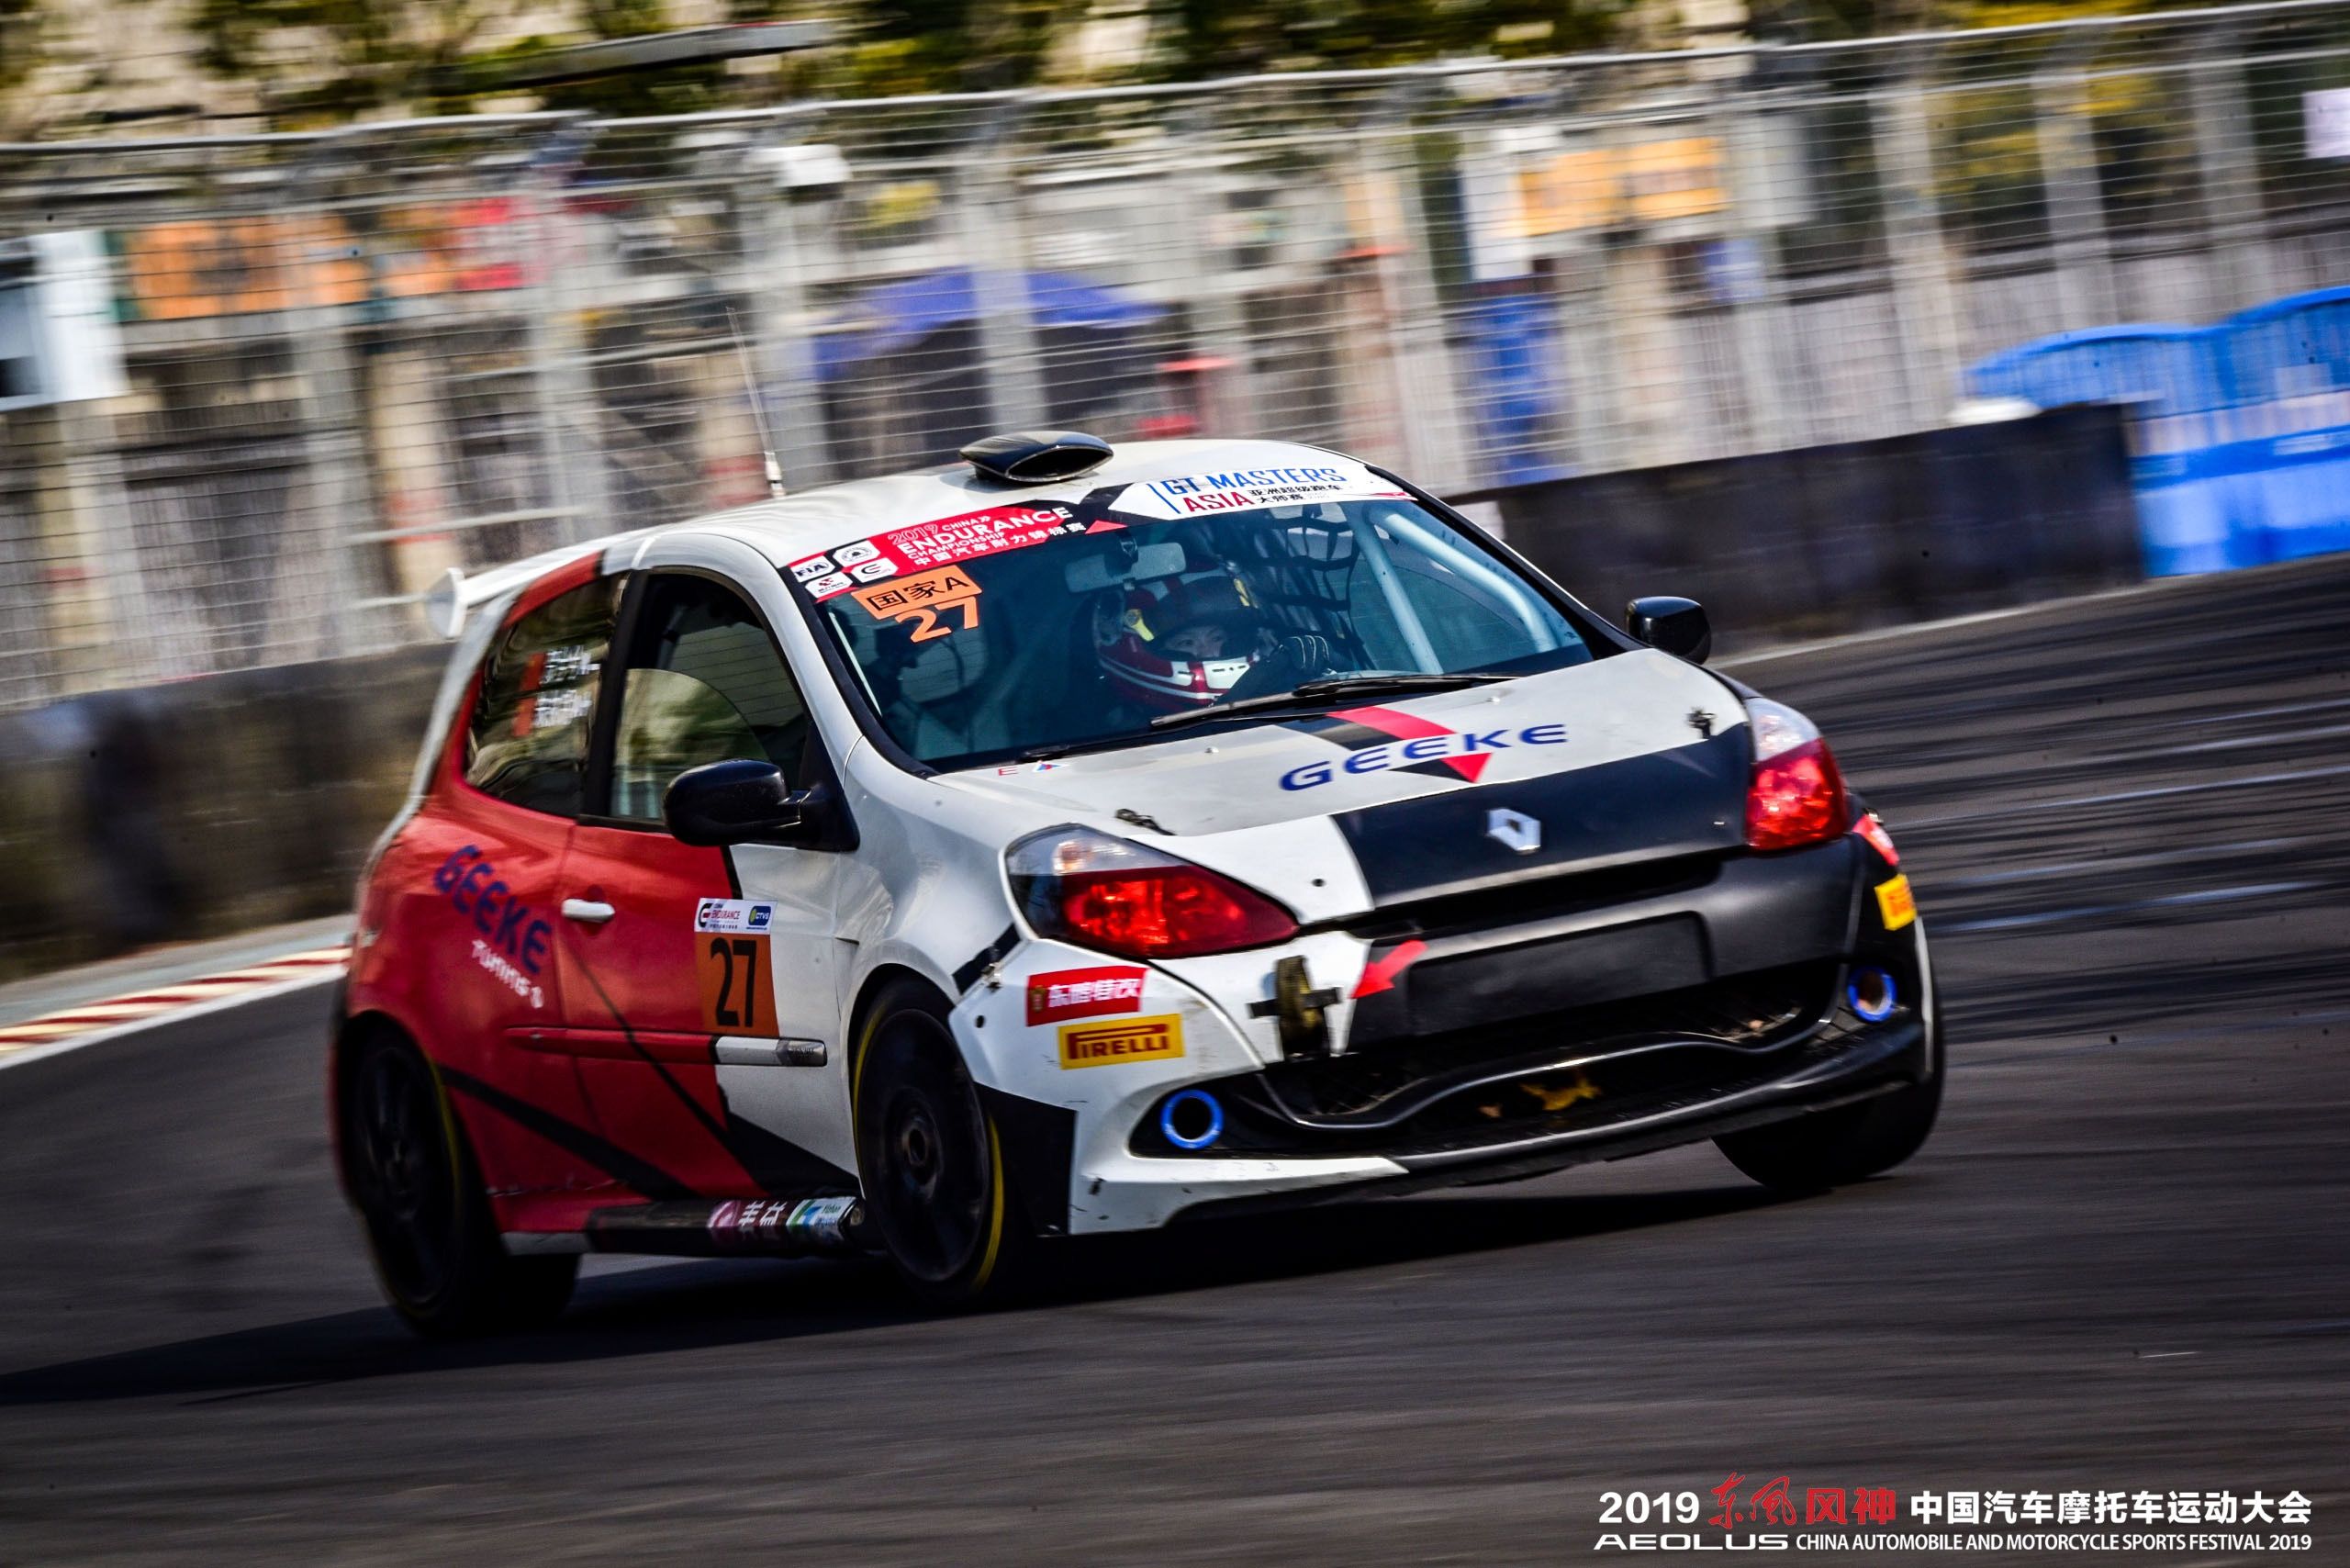 2006 Renault (르노) CLIO CUP